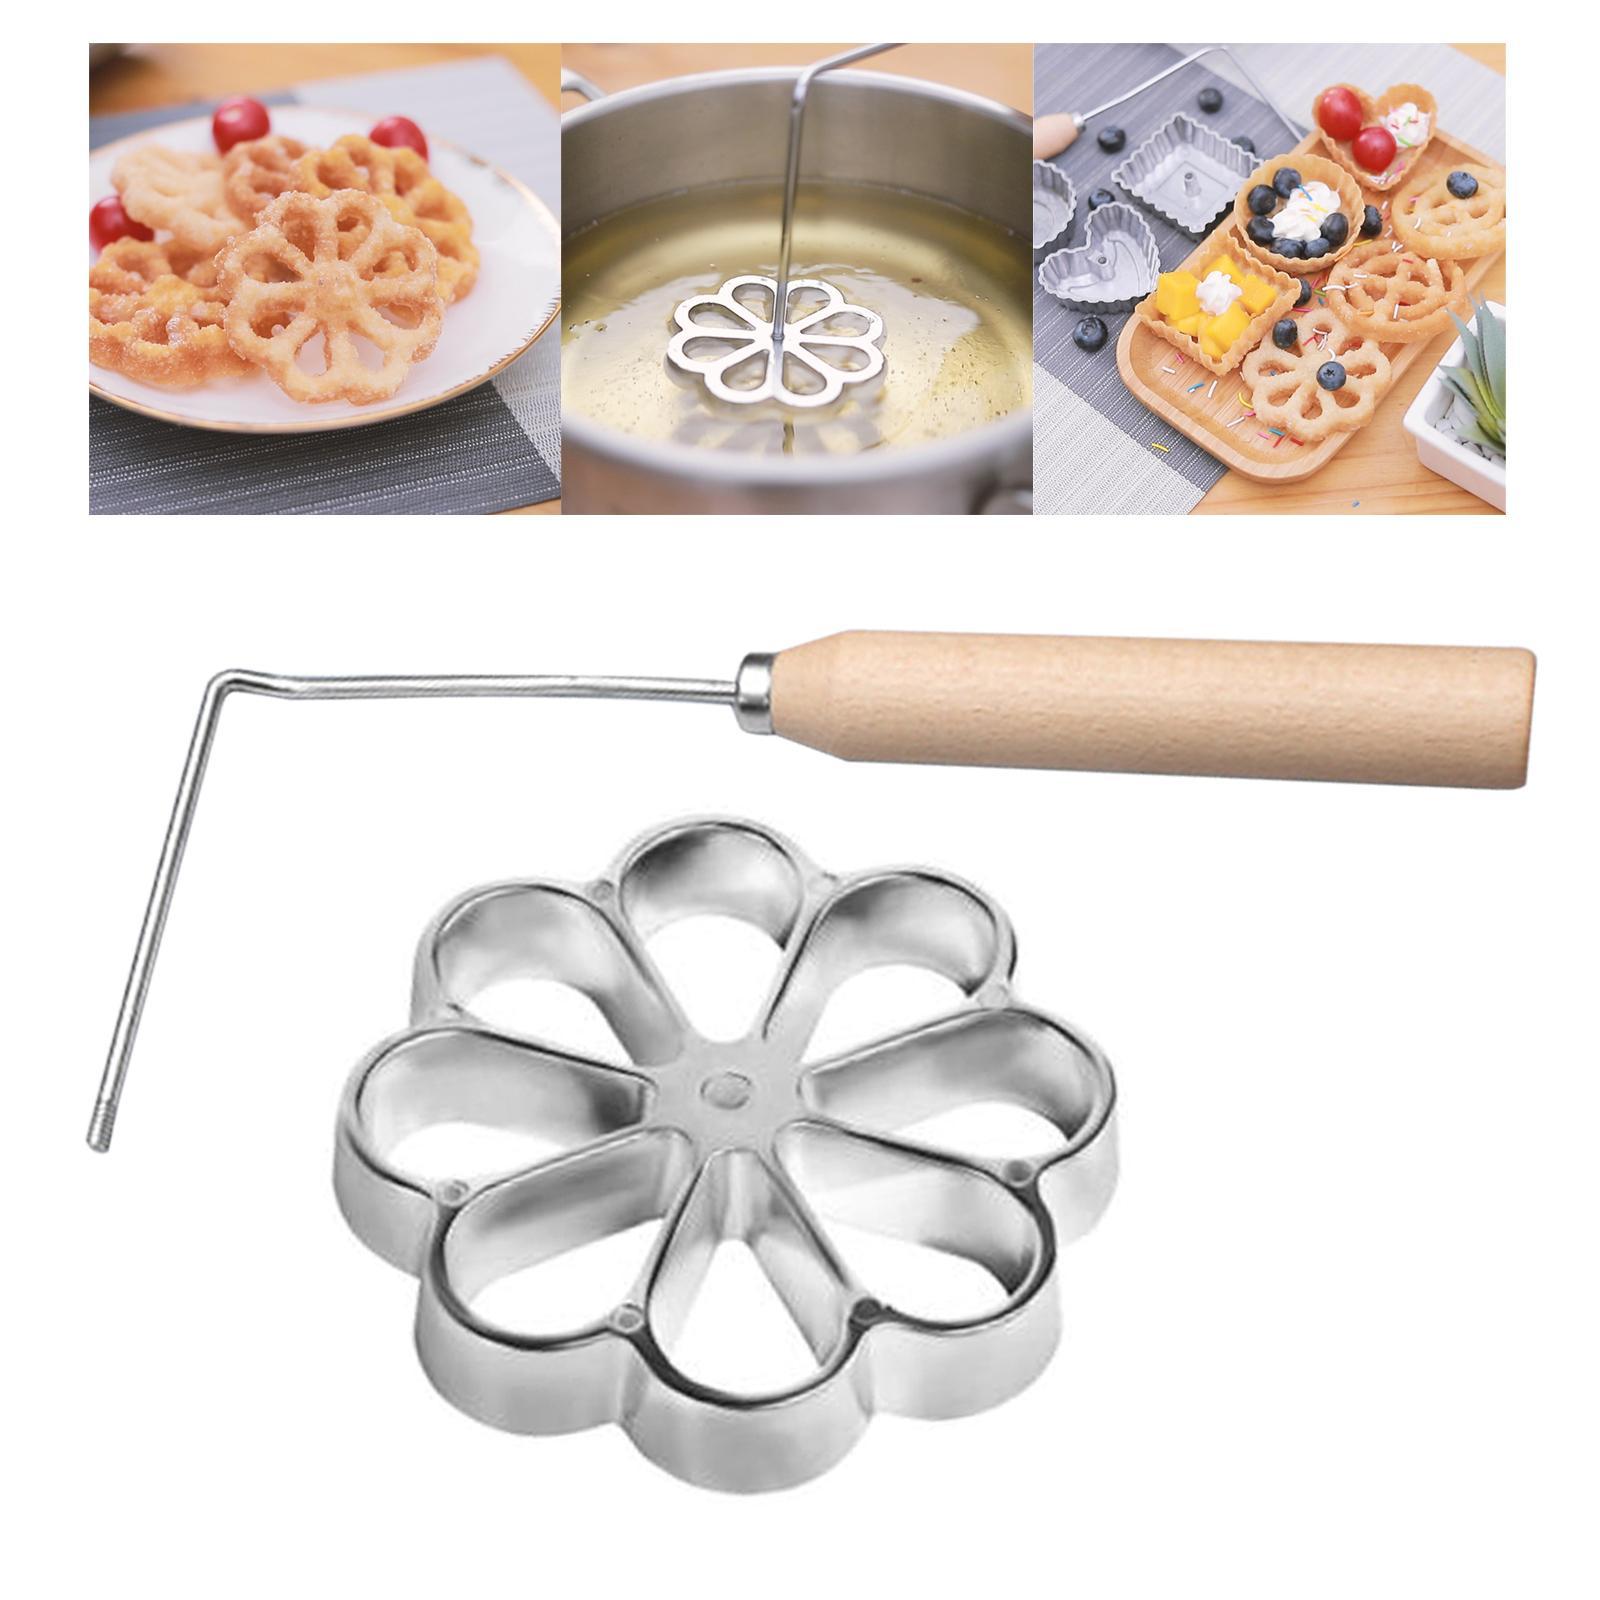 Rosette Iron Set Maker  With Handle Waffle Timbale Molds